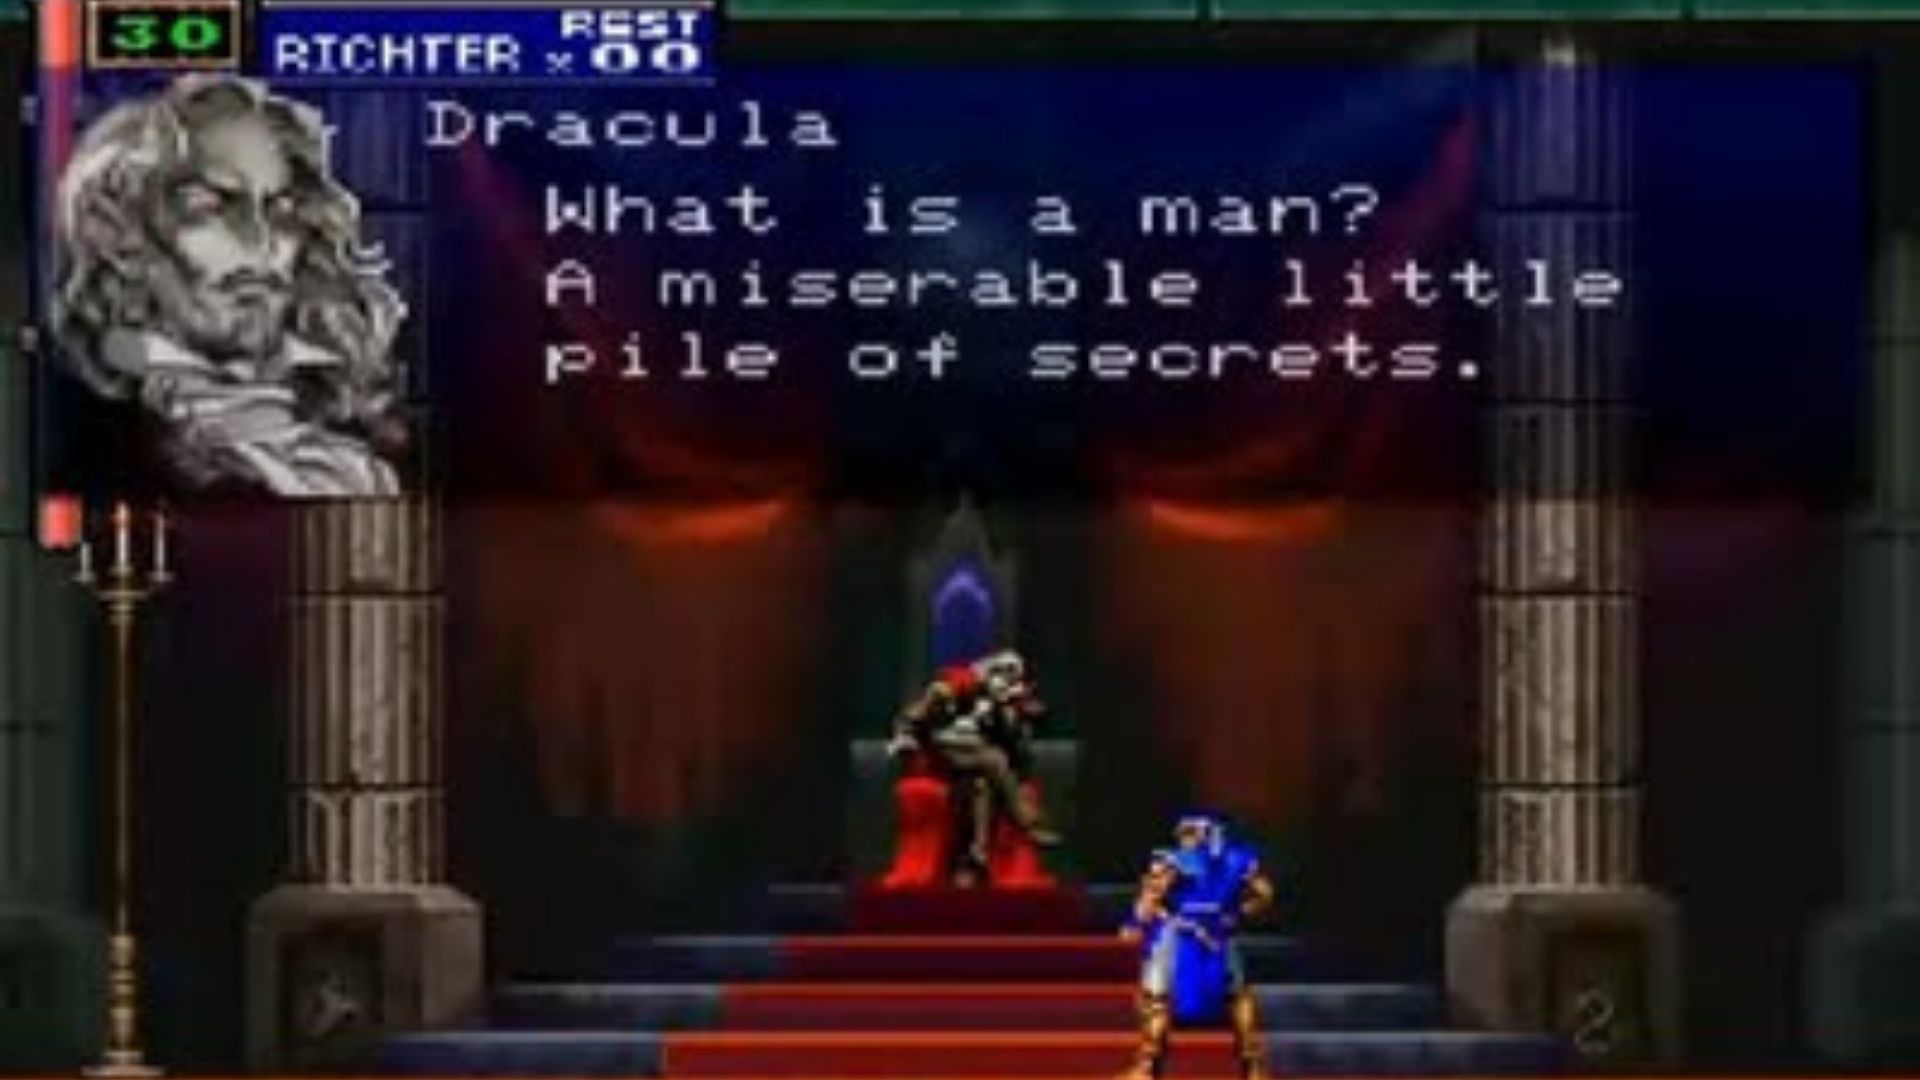 Richter talking to Dracula on his throne in Castlevania: Symphony of the Night. Dracula is saying "What is a man? A miserable little pile of secrets."